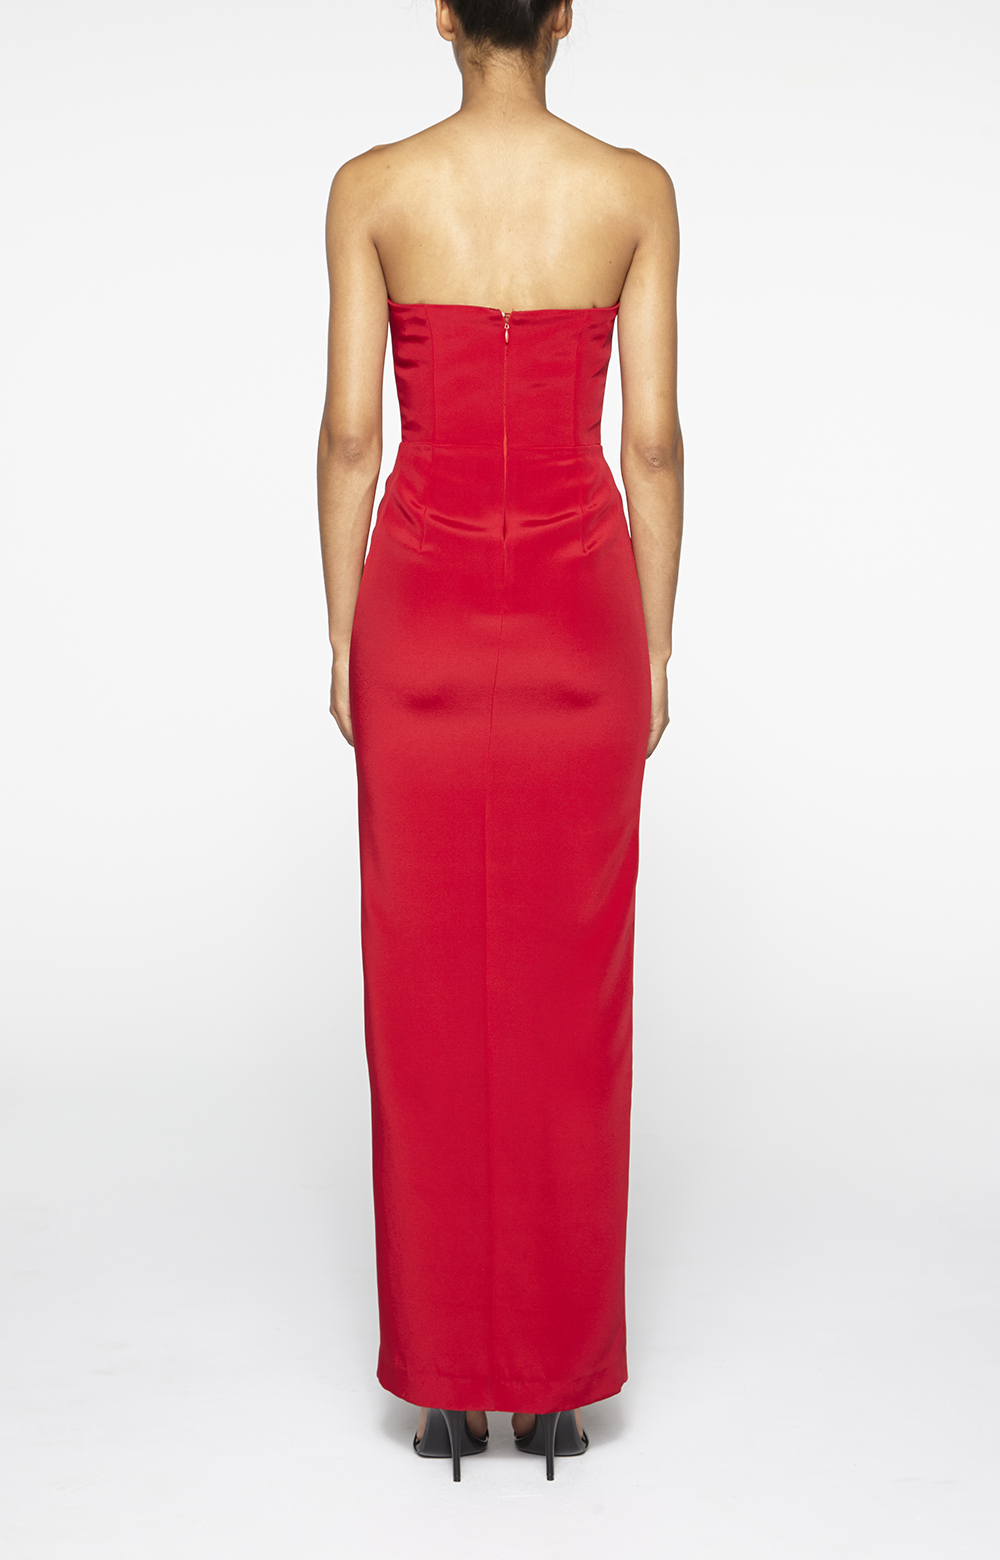 Lyst - Nicole Miller Casey Strapless Gown in Red